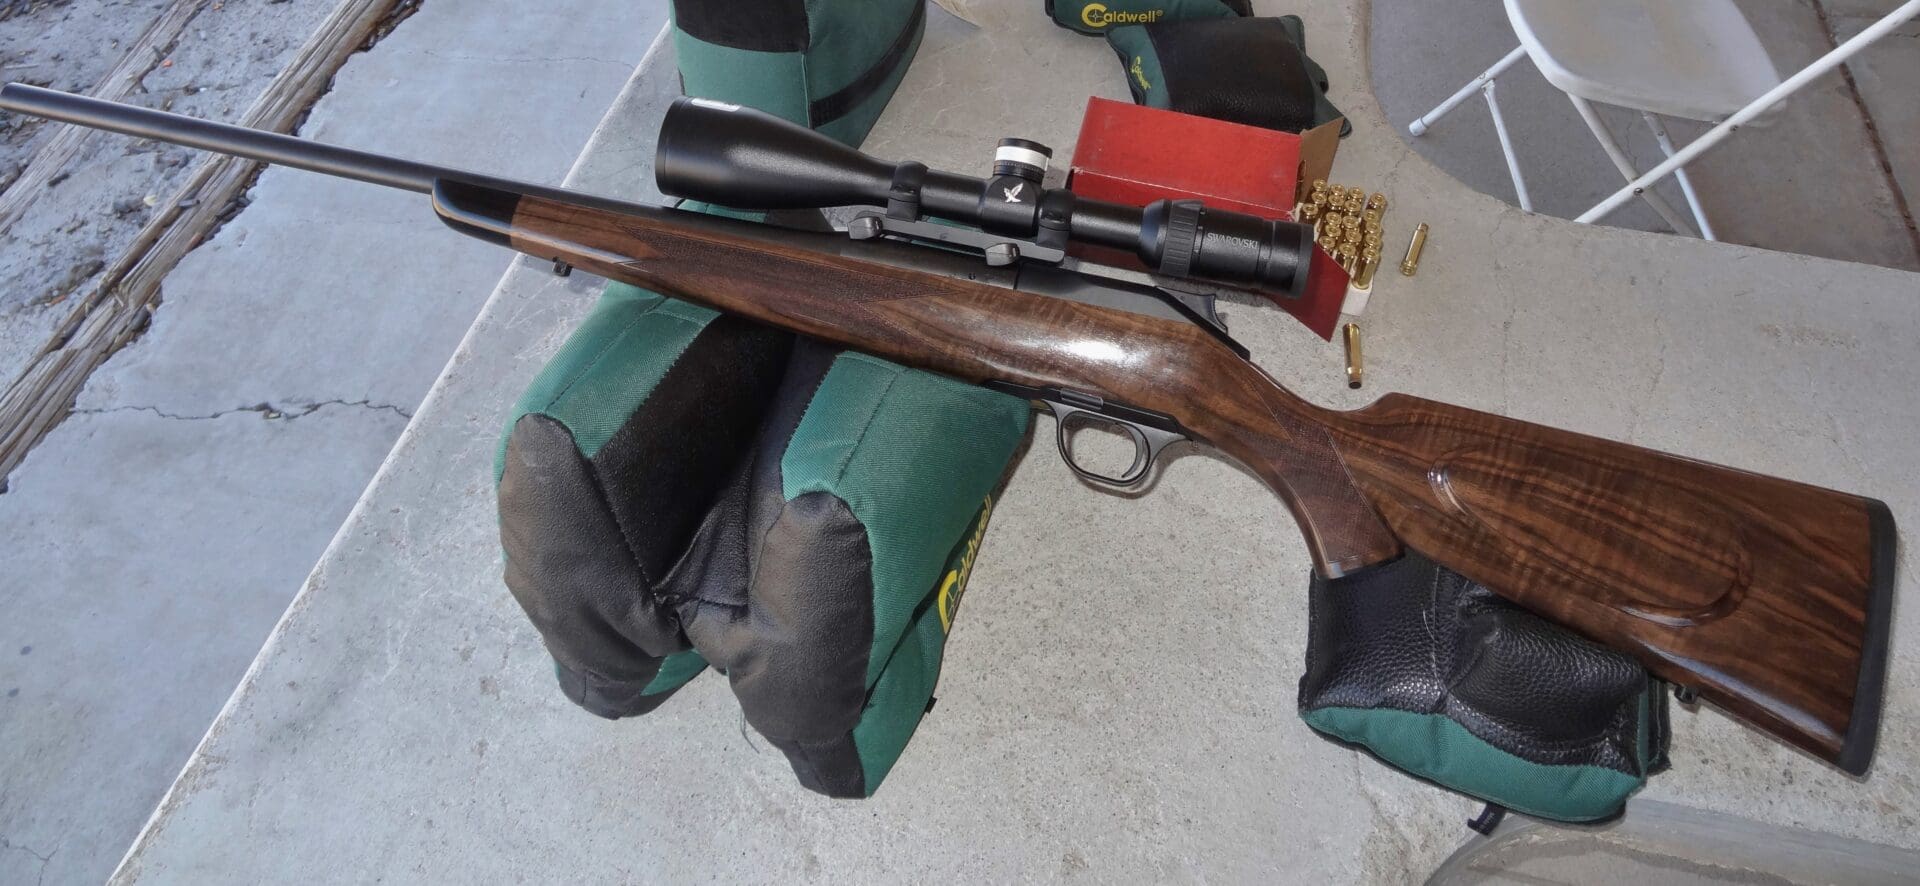 Range Day: Hands on With the Blaser R8 Classic Sporter.